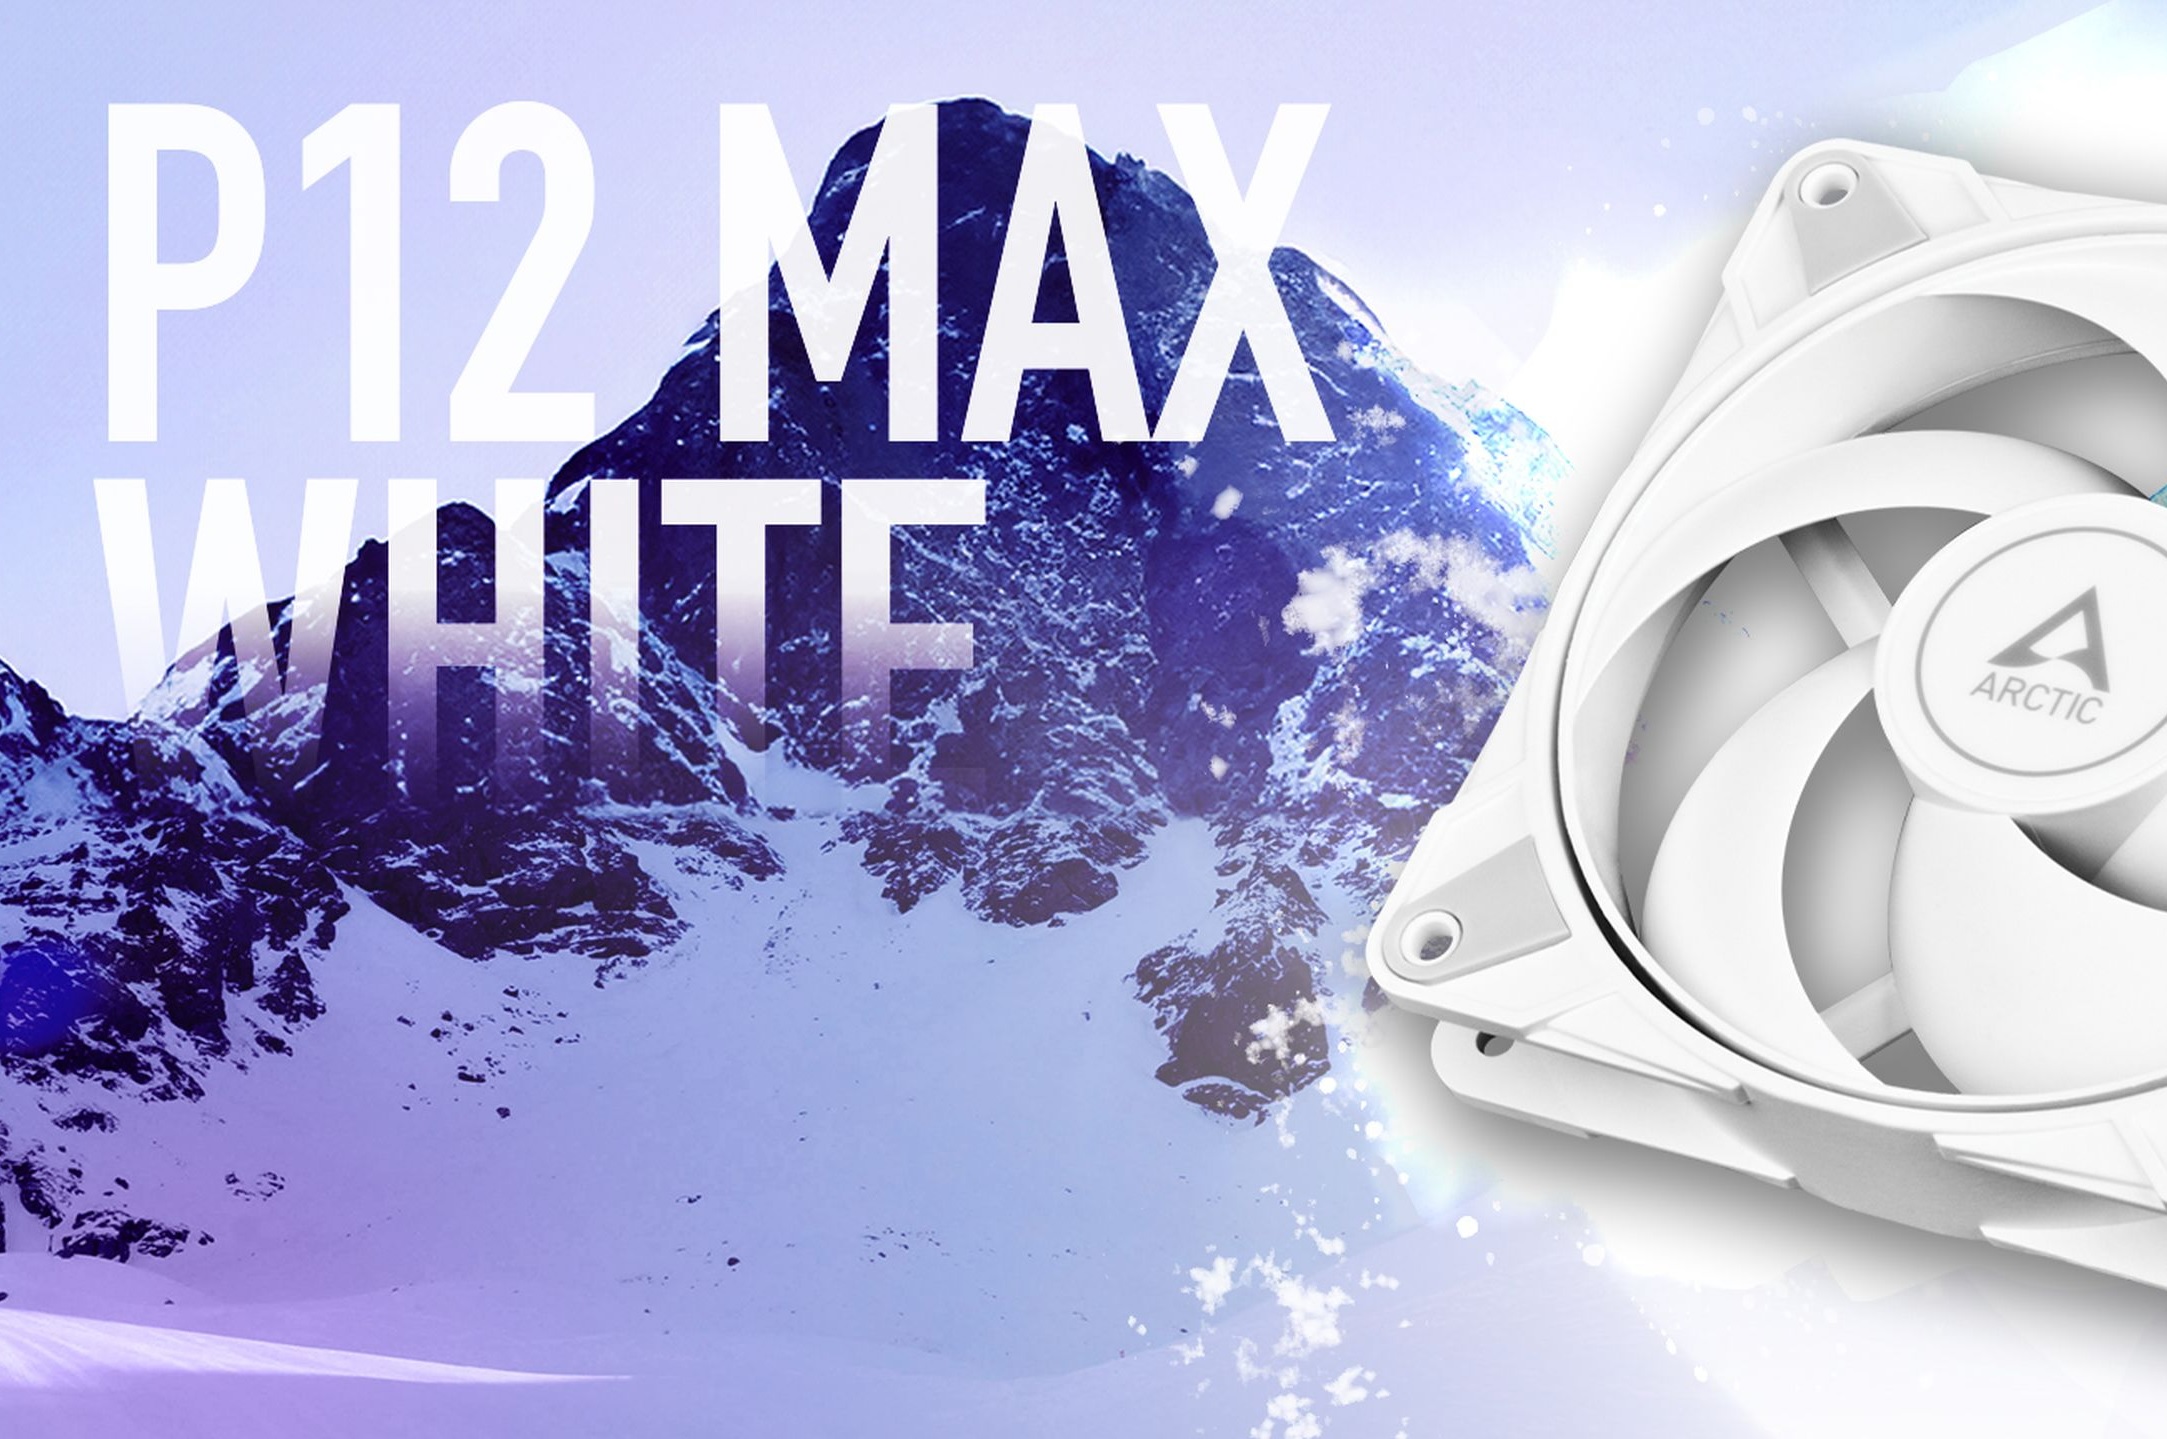 Return to FDB – the main new feature of the Arctic P12 Max White